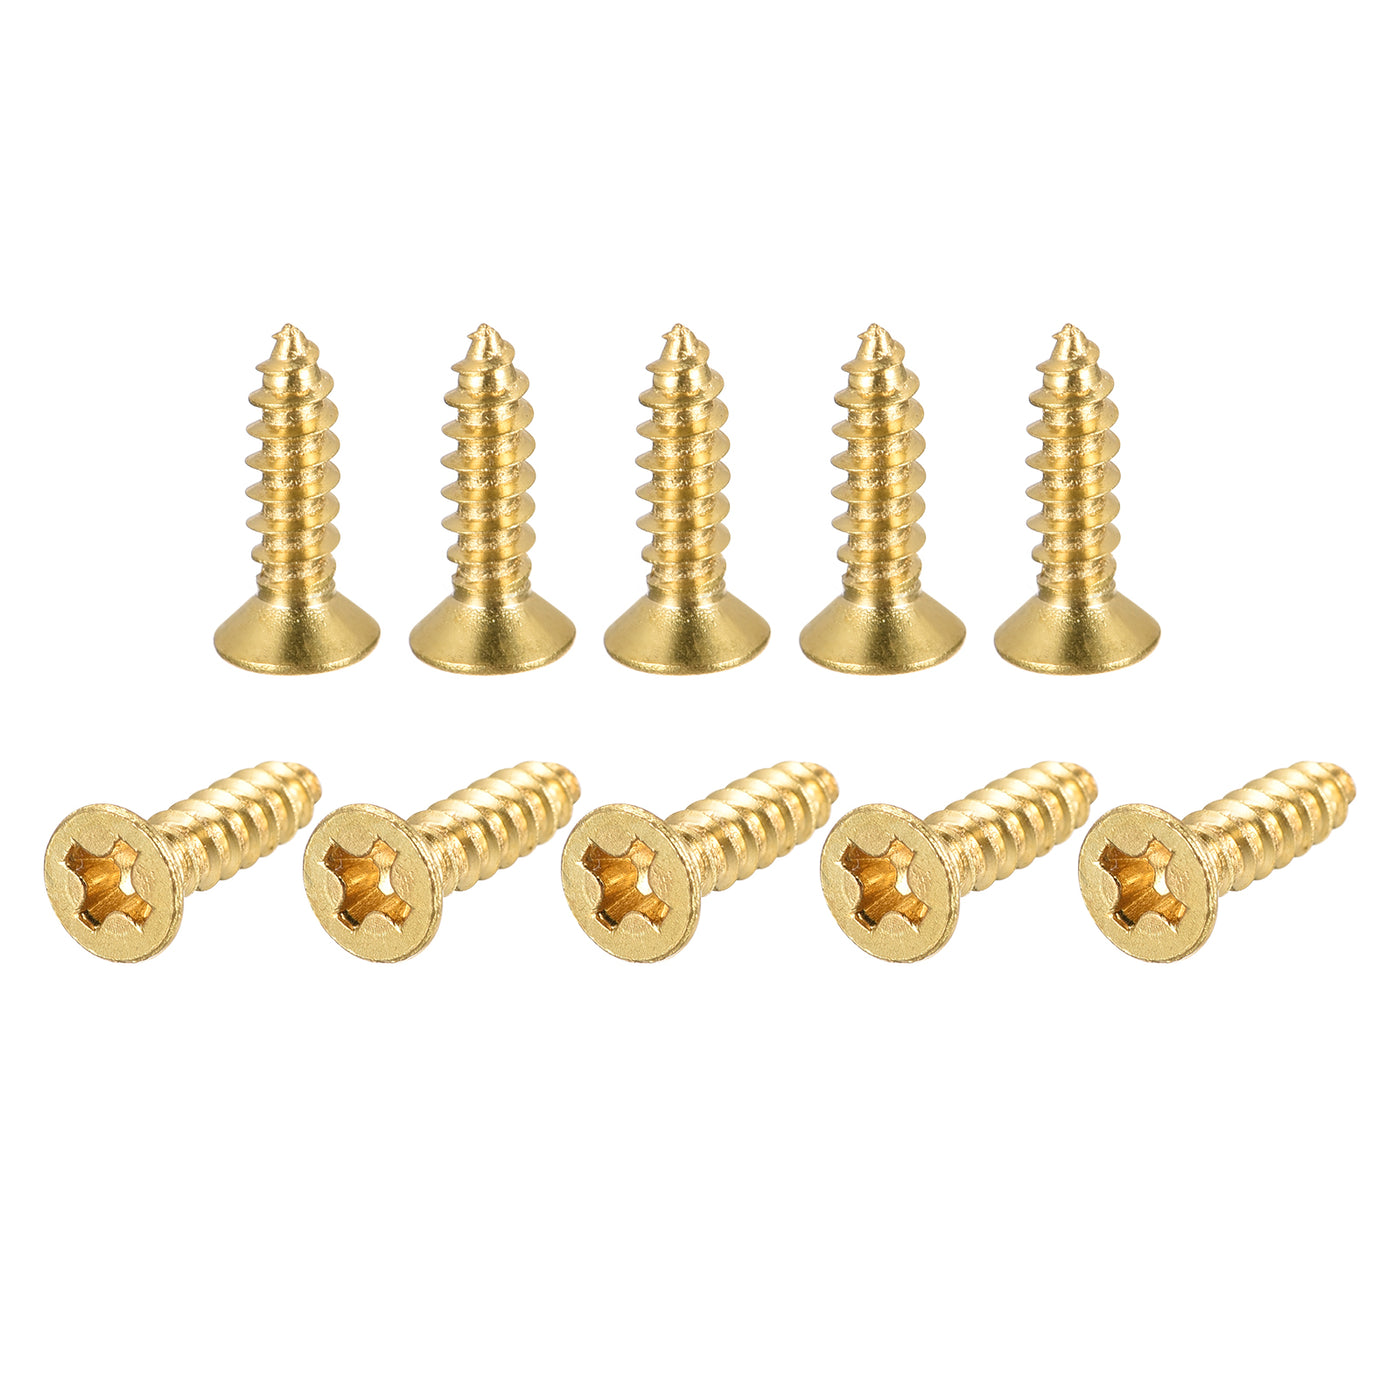 uxcell Uxcell Brass Wood Screws, M3x12mm Phillips Flat Head Self Tapping Connector for Door, Cabinet, Wooden Furniture 100Pcs